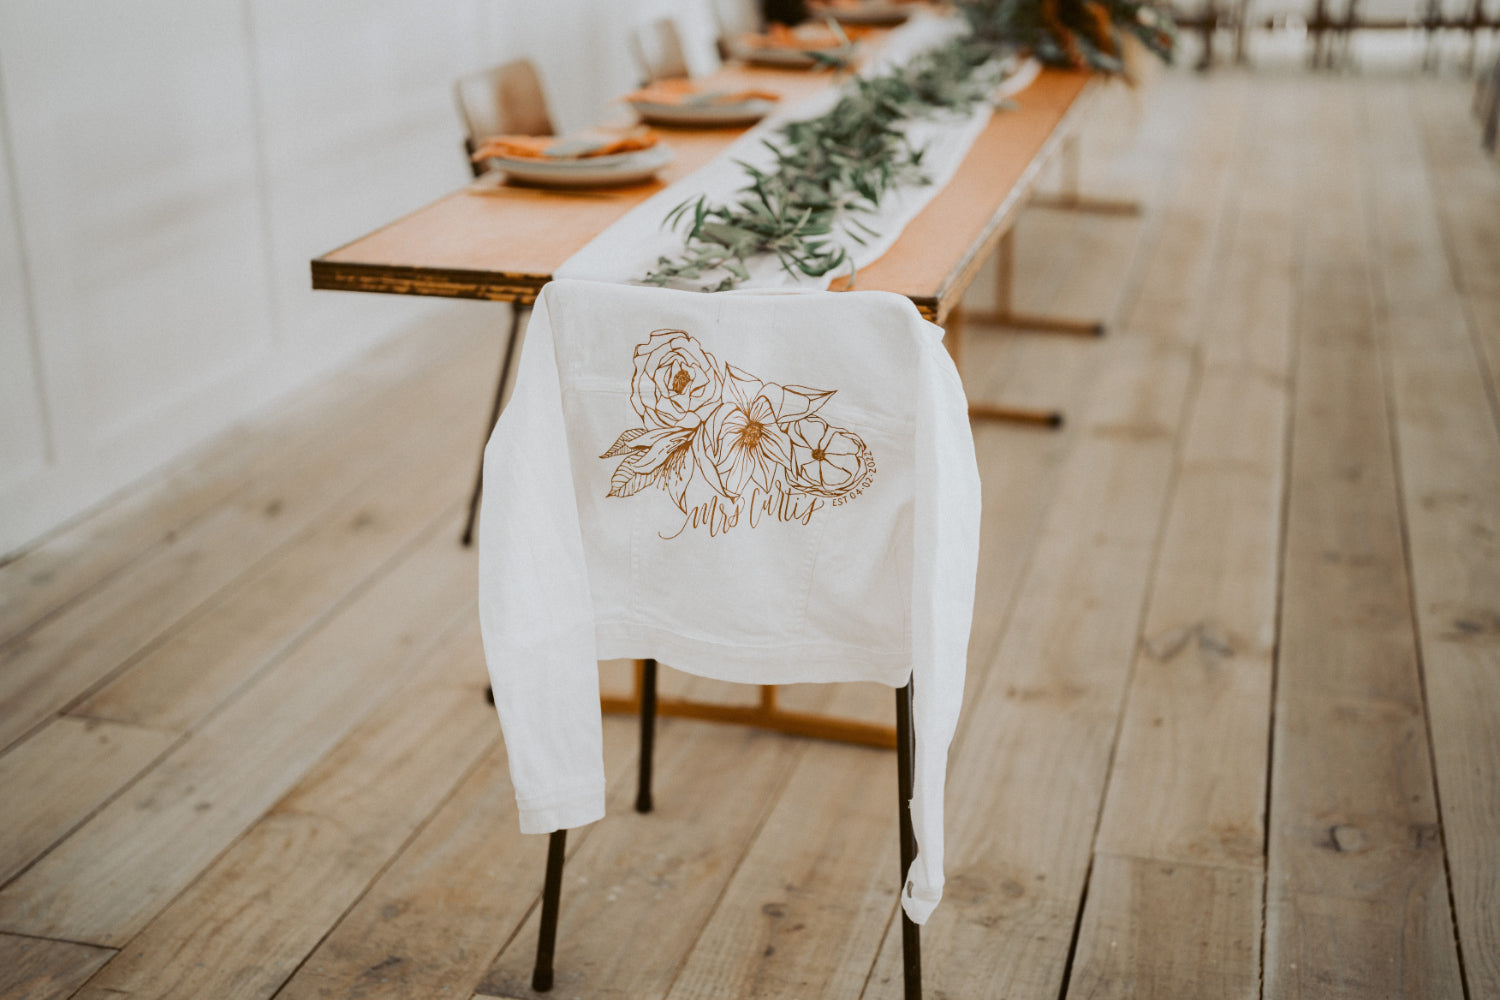 Bespoke Painted Bridal Jacket | Old Forest School | The Paper Gazelle